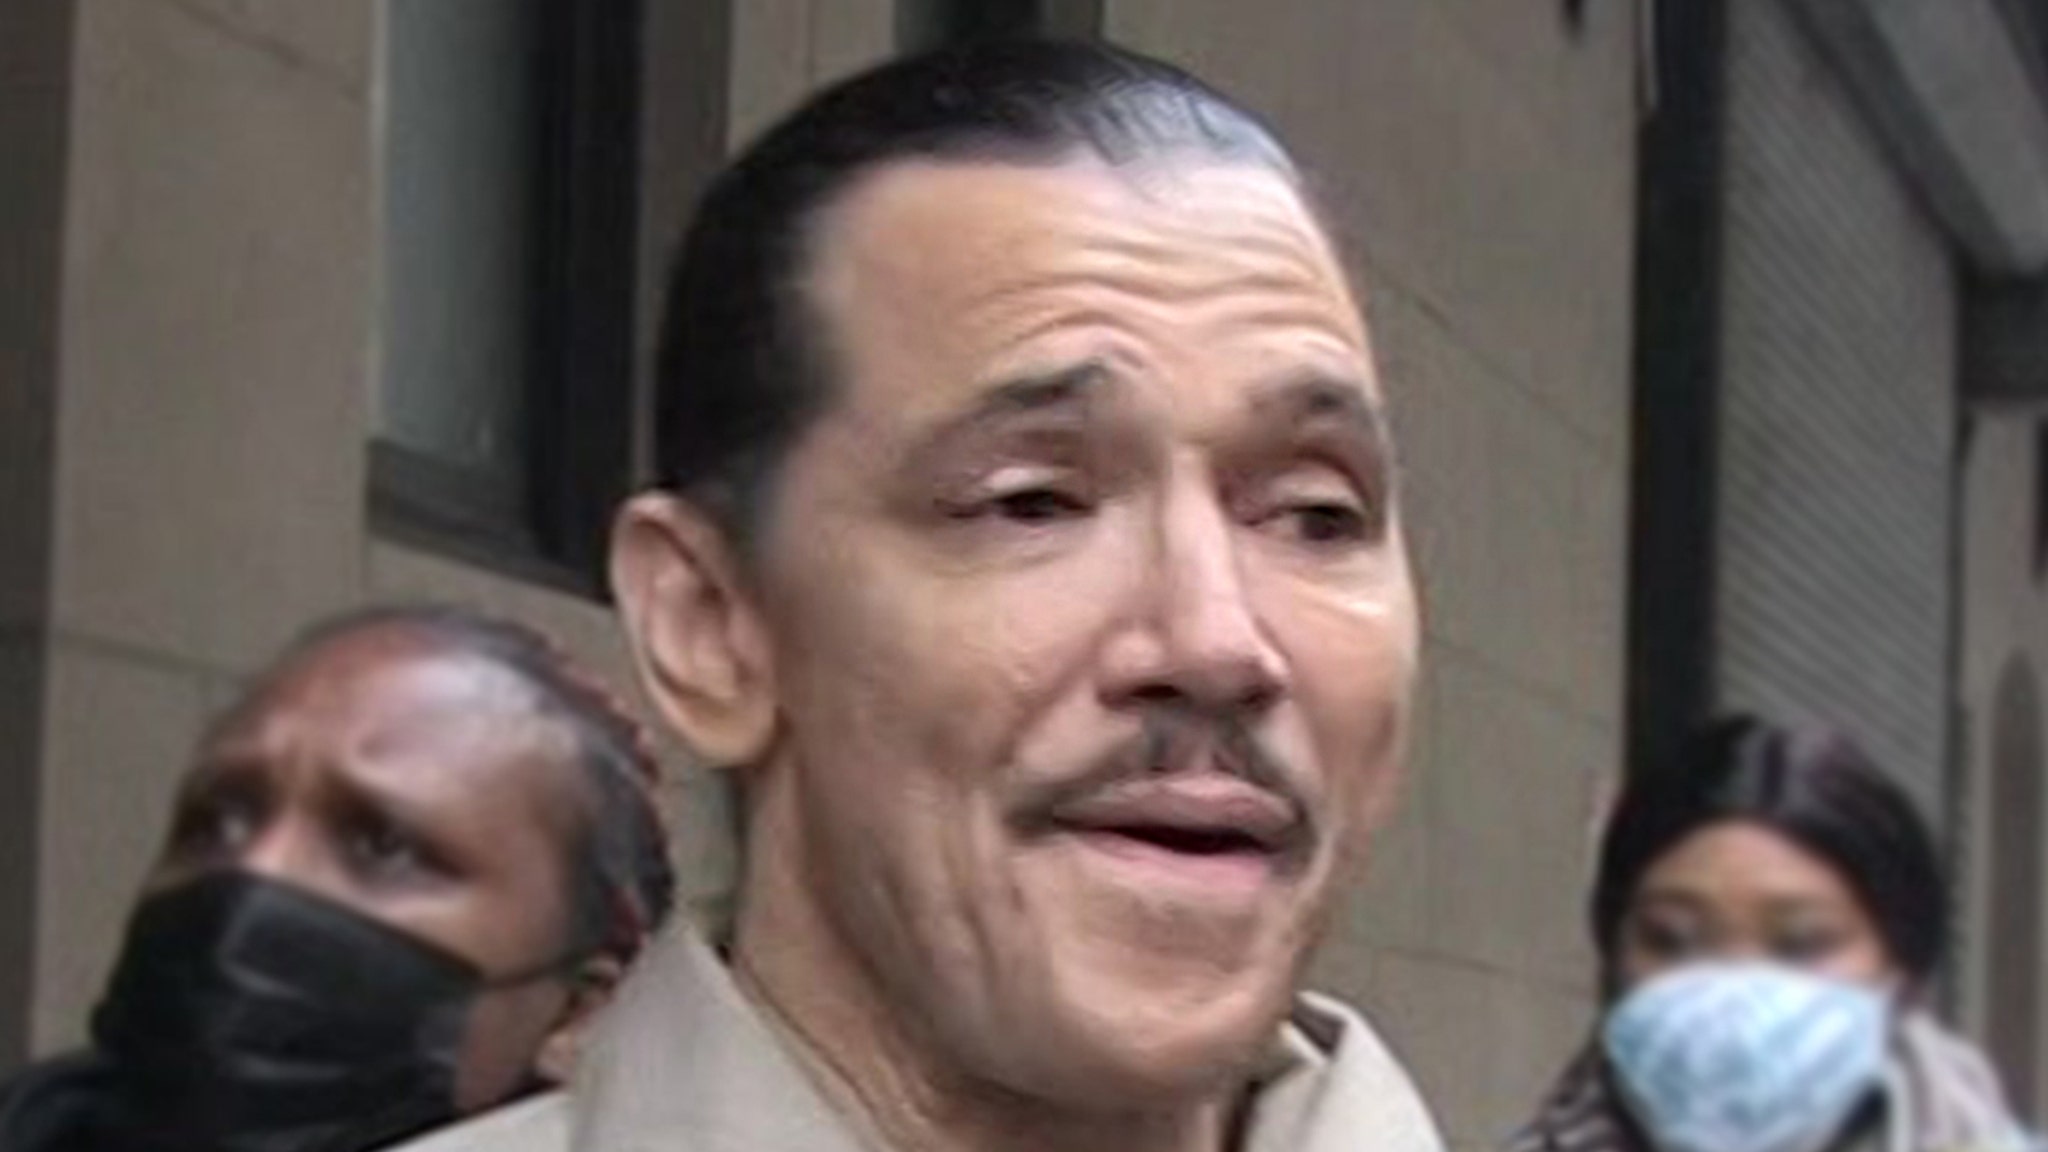 El DeBarge arrested for possession of weapons and drugs